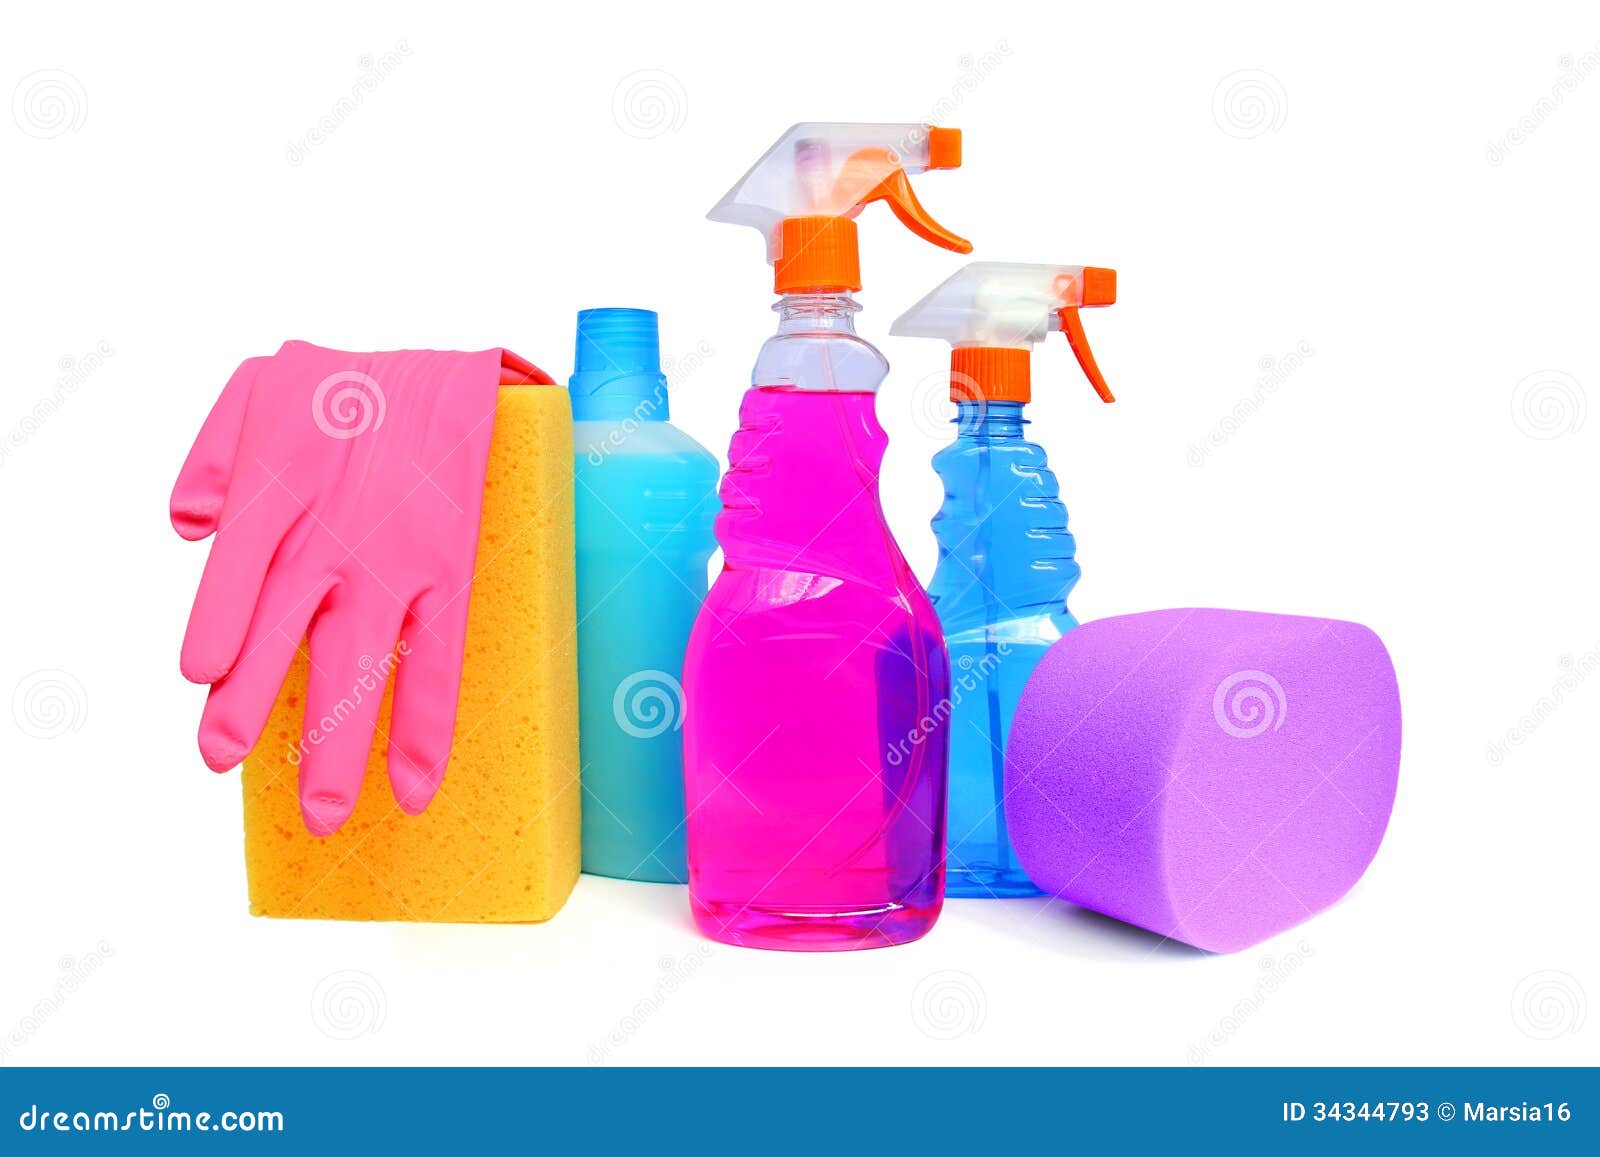 13,020 Purple Cleaning Images, Stock Photos, 3D objects, & Vectors